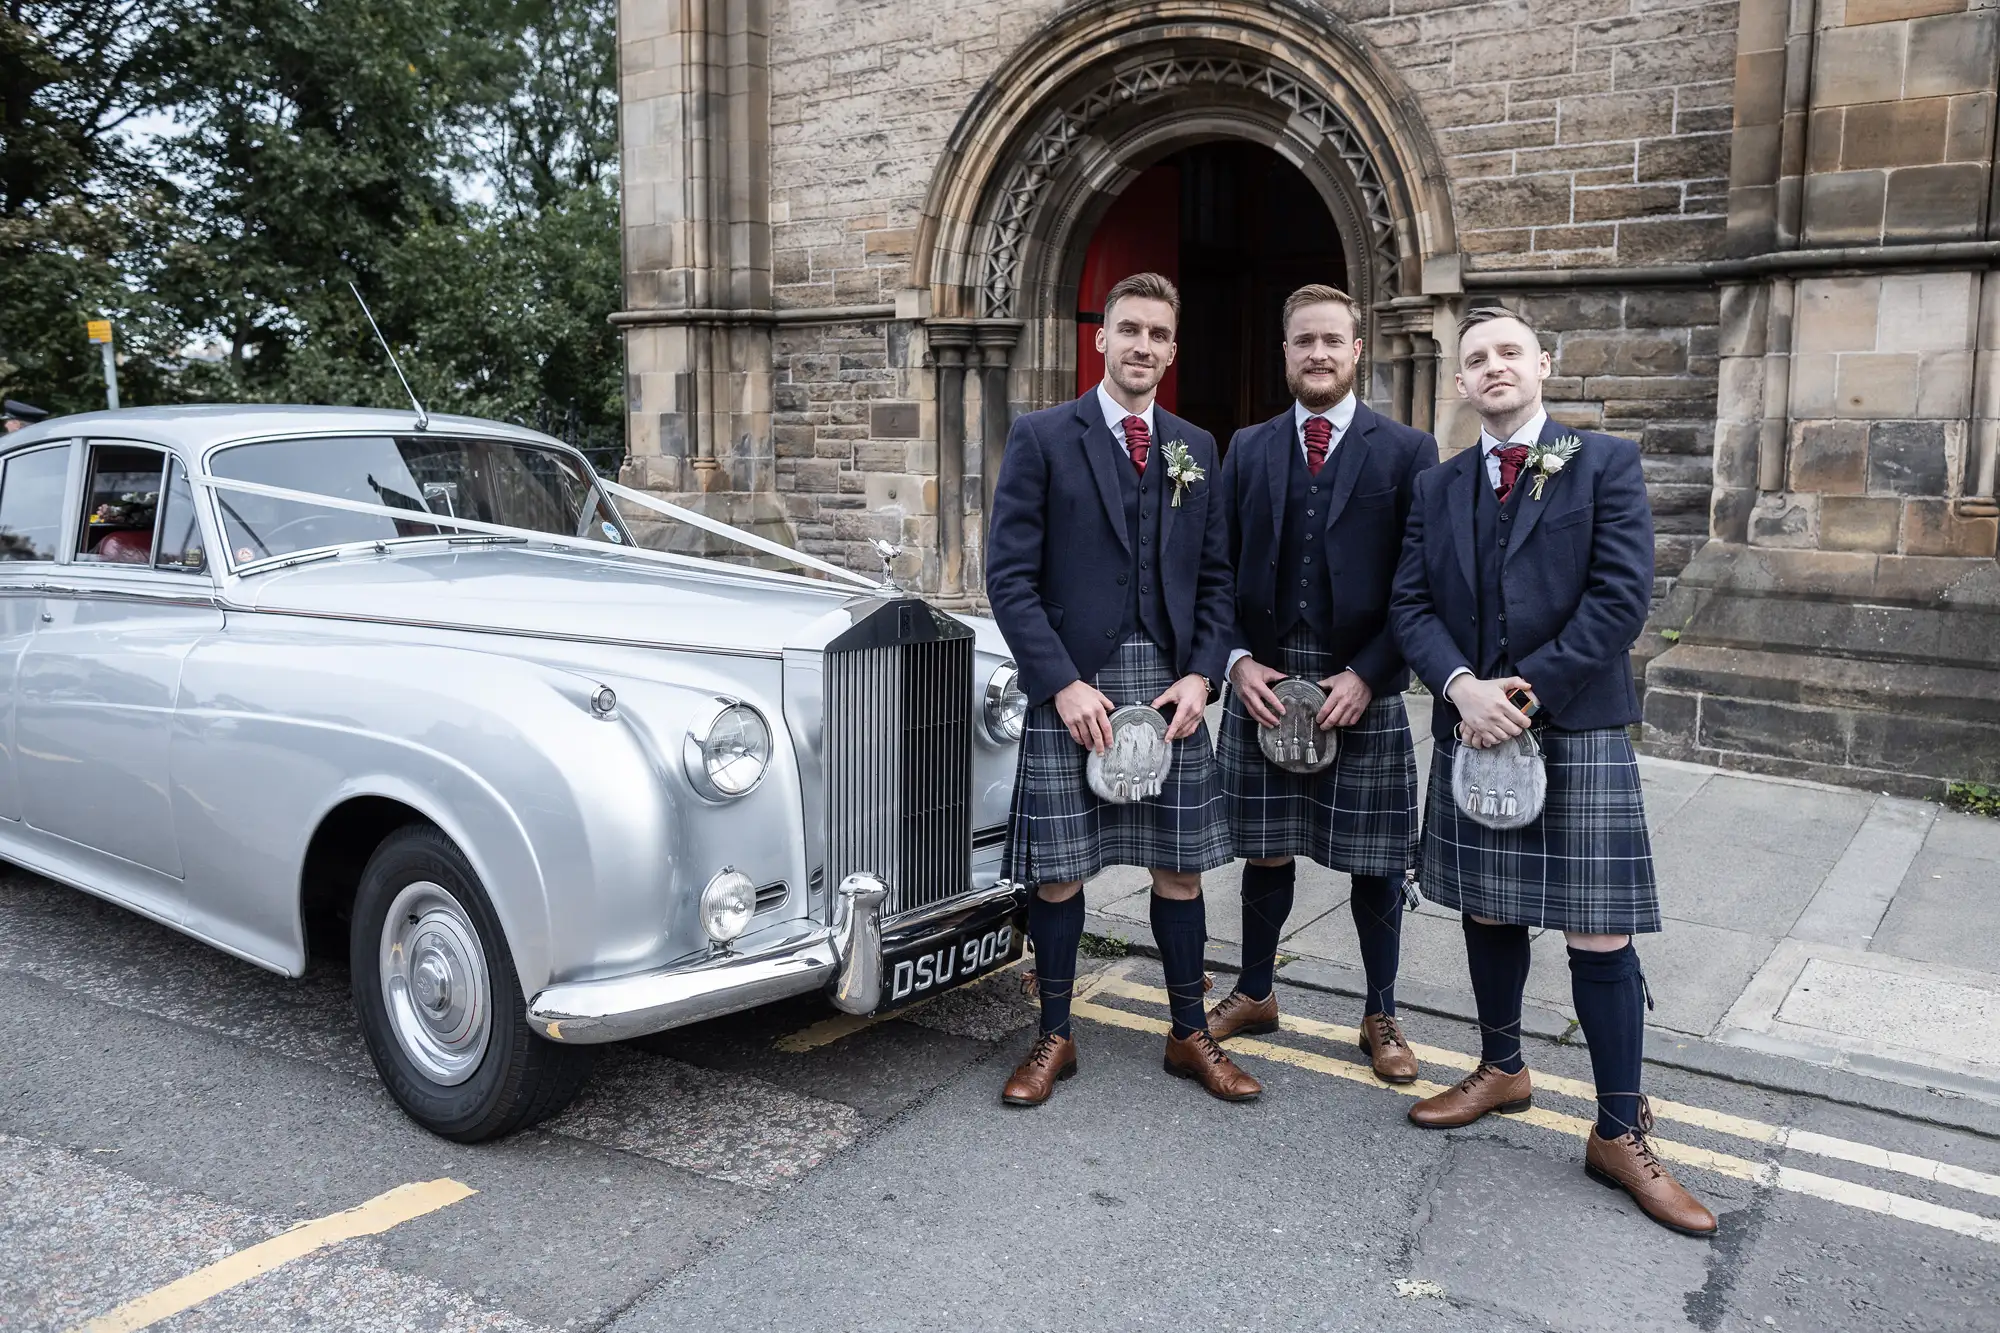 Three men in kilts and blazers stand by a classic silver rolls-royce near a stone church, each holding a glass.